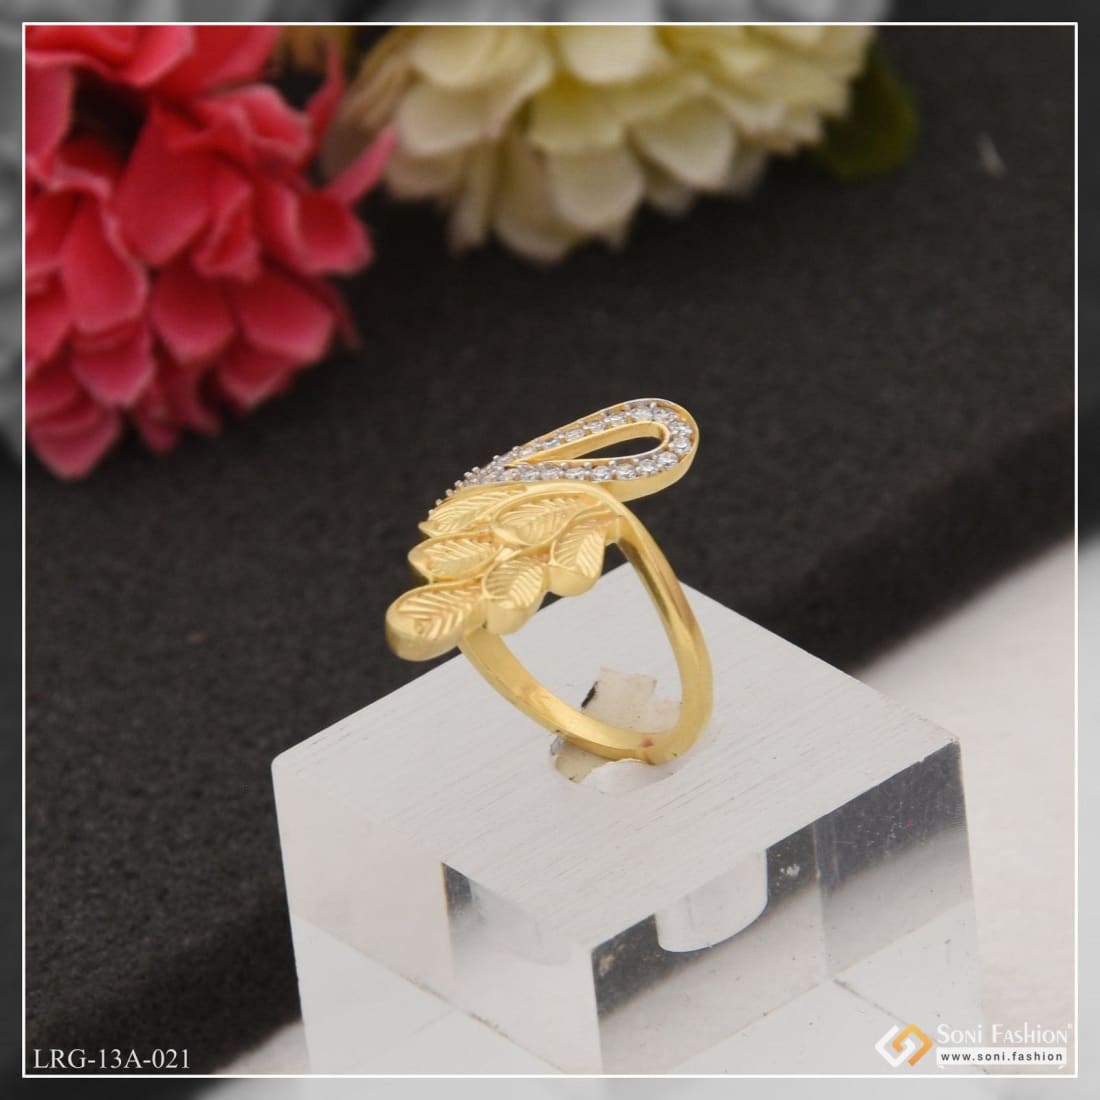 Unusual diamond ring designs for women karat pakistan – Gold Nose Pin  Designs With Prices In Pakistan – unique handmade sterling silver rings  jewelry from israel silver